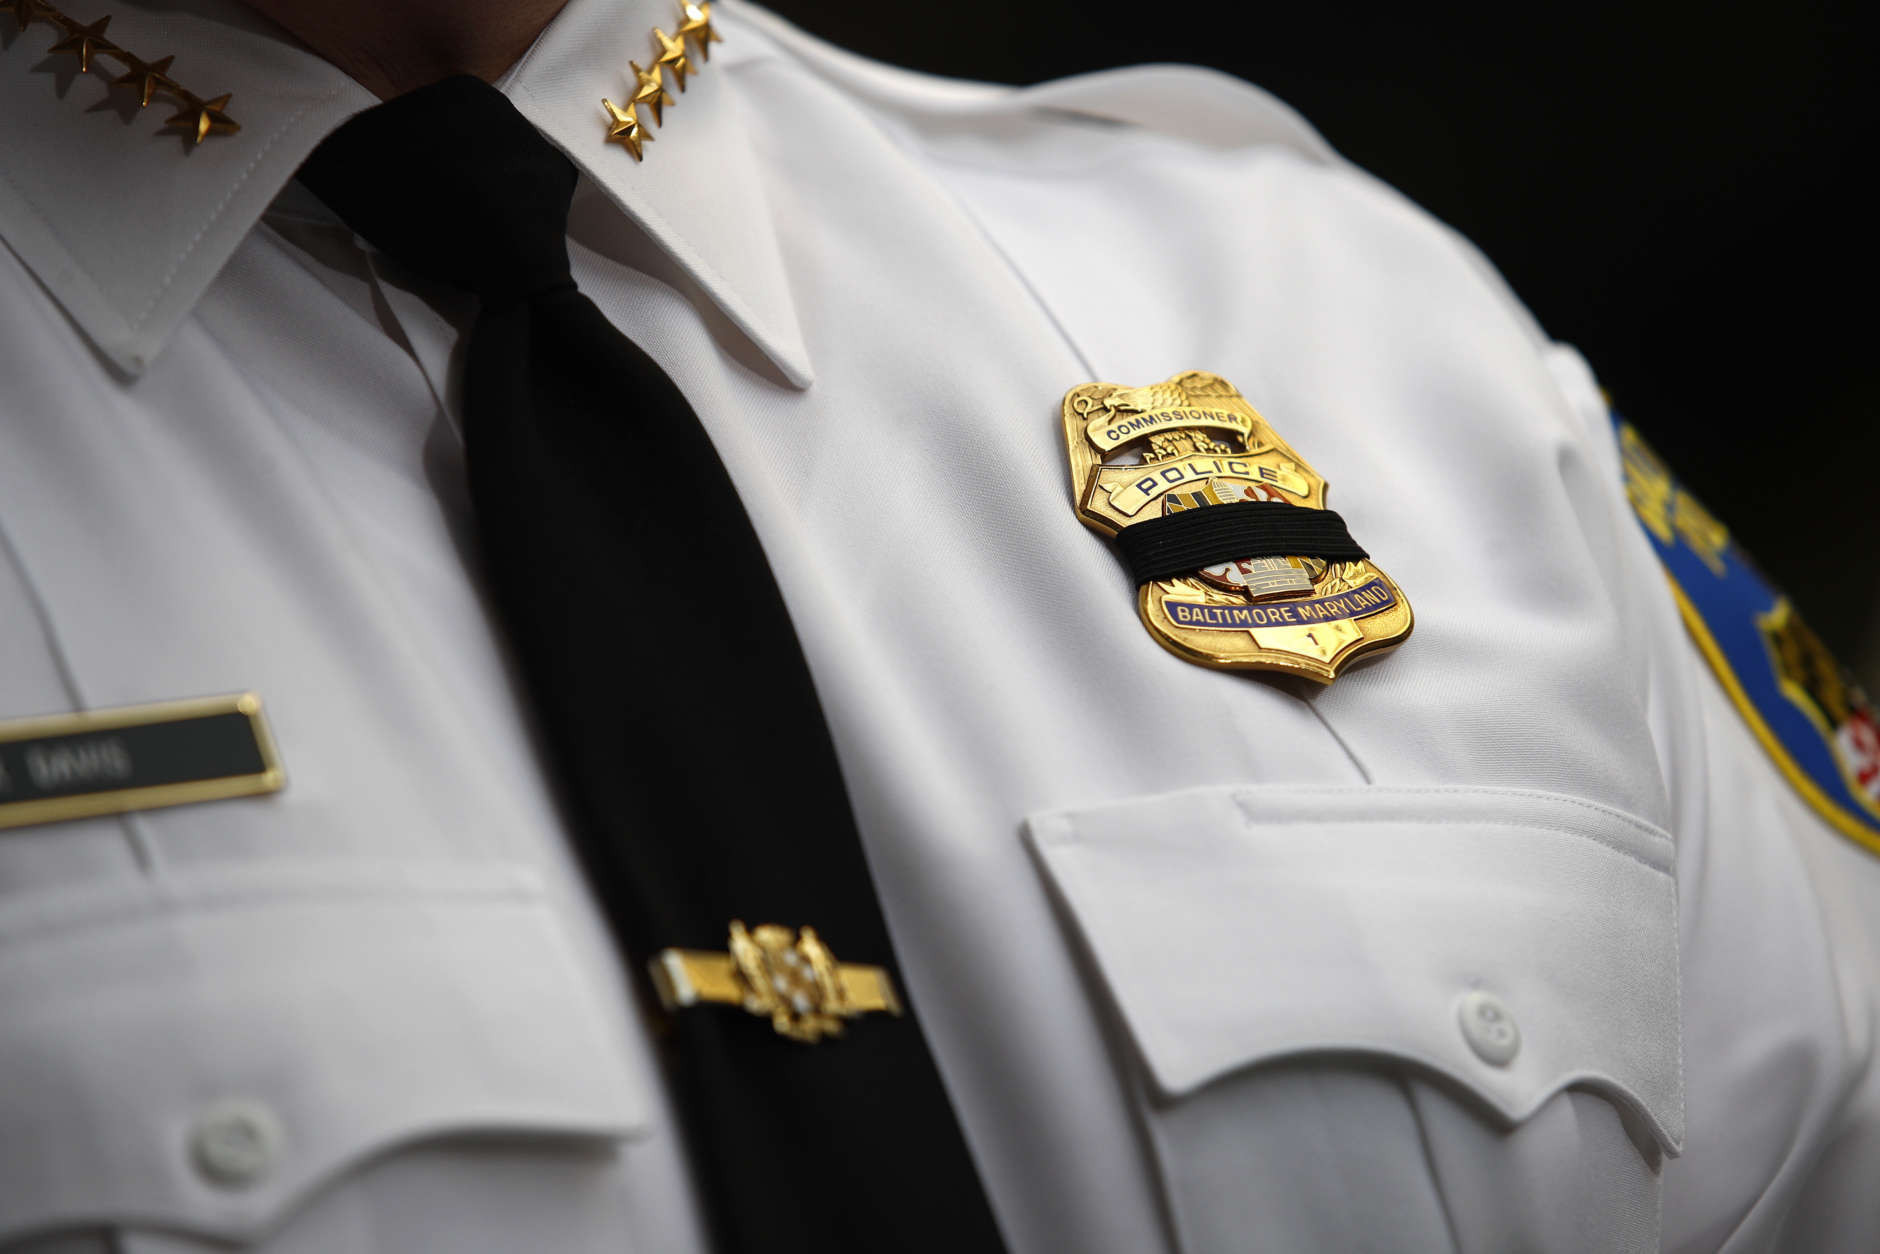 Baltimore homicide detective shot in head dies; suspect at large - WTOP ...